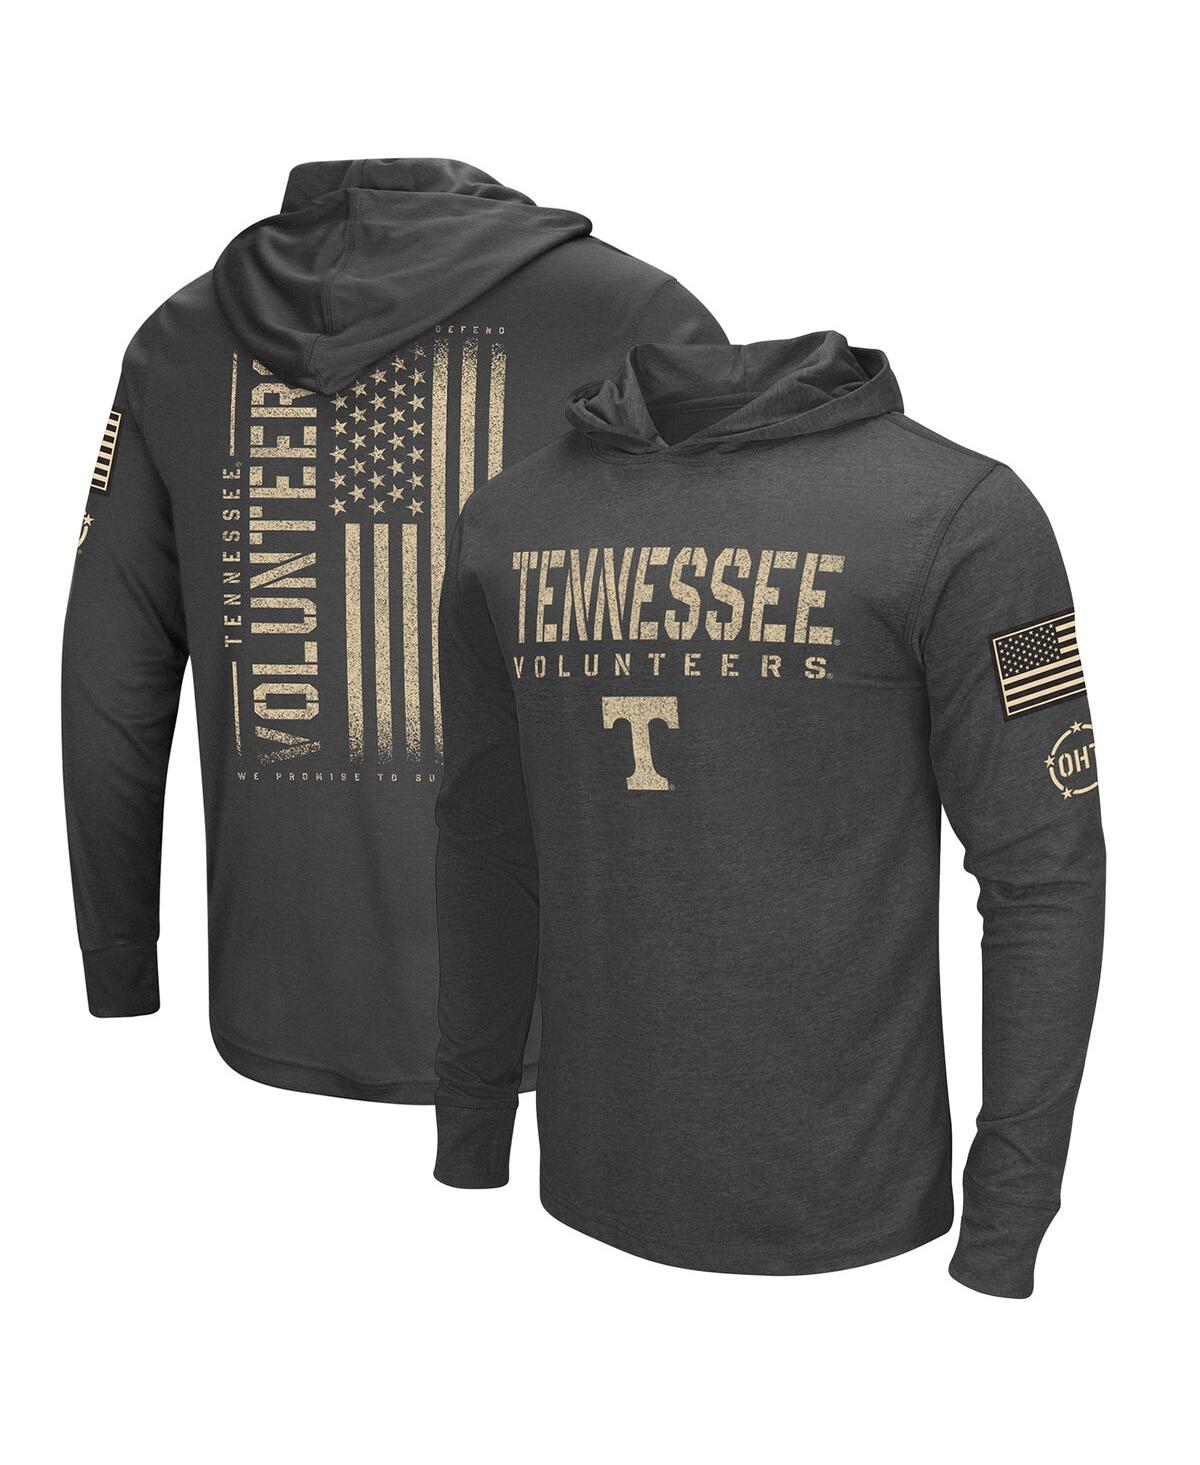 Colosseum Men's  Charcoal Distressed Tennessee Volunteers Team Oht Military-inspired Appreciation Hoo